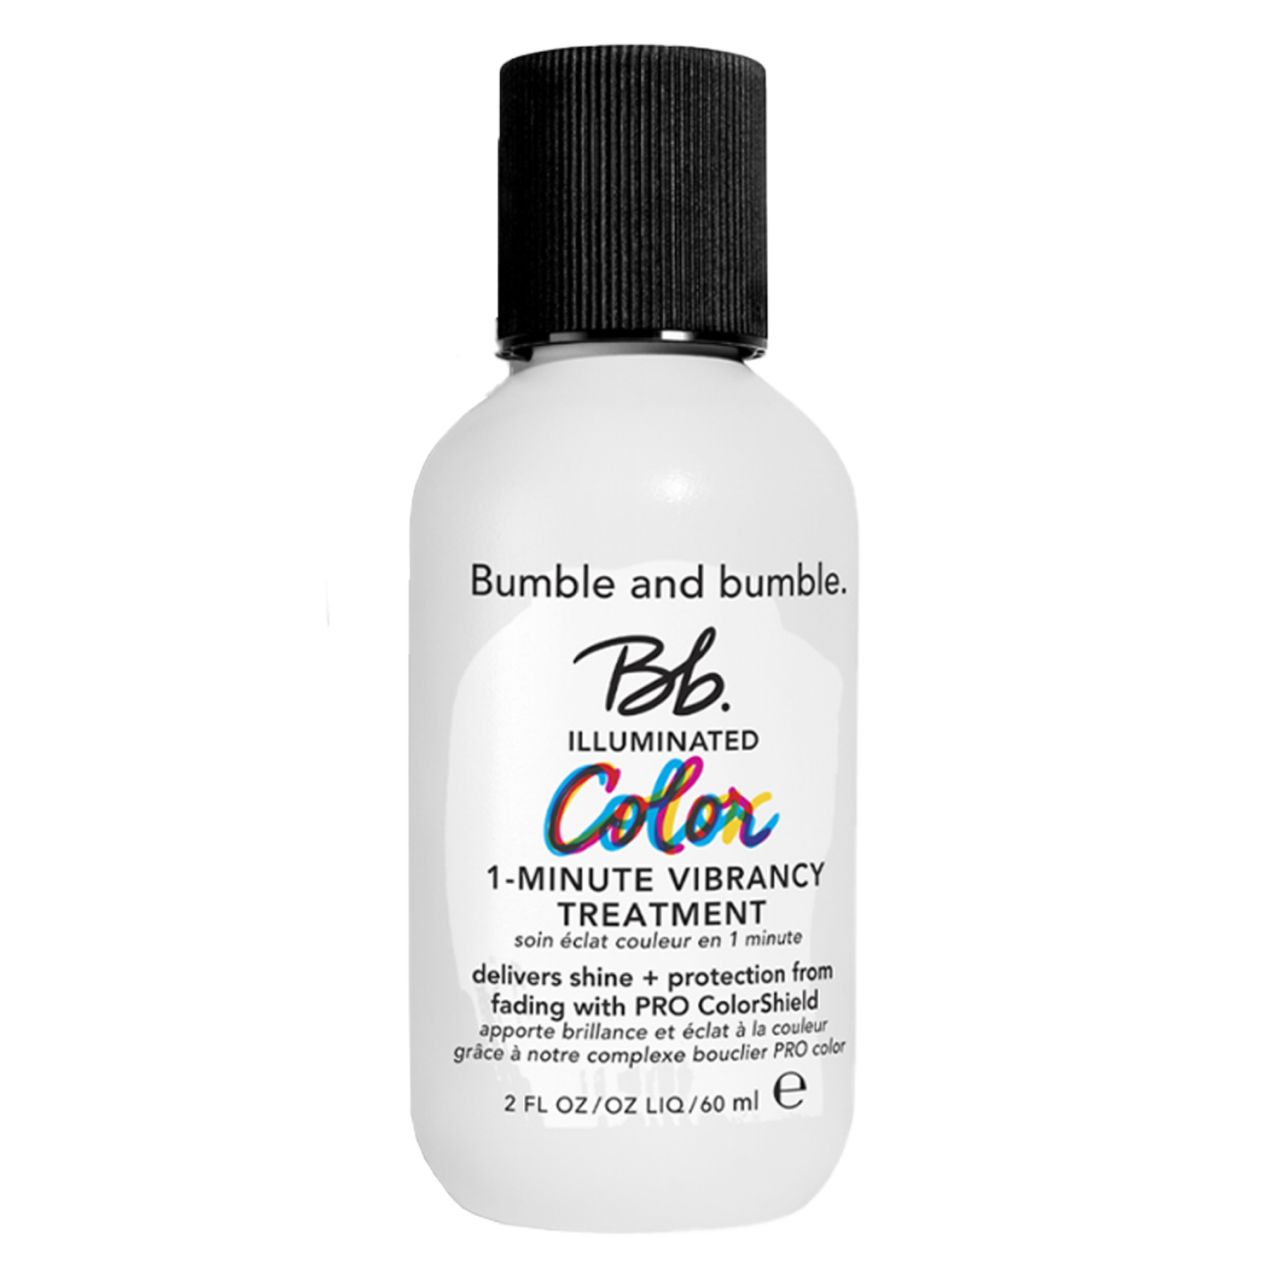 Bb. Color - Illuminated Color 1-Minute Vibrancy Treatment von Bumble and bumble.